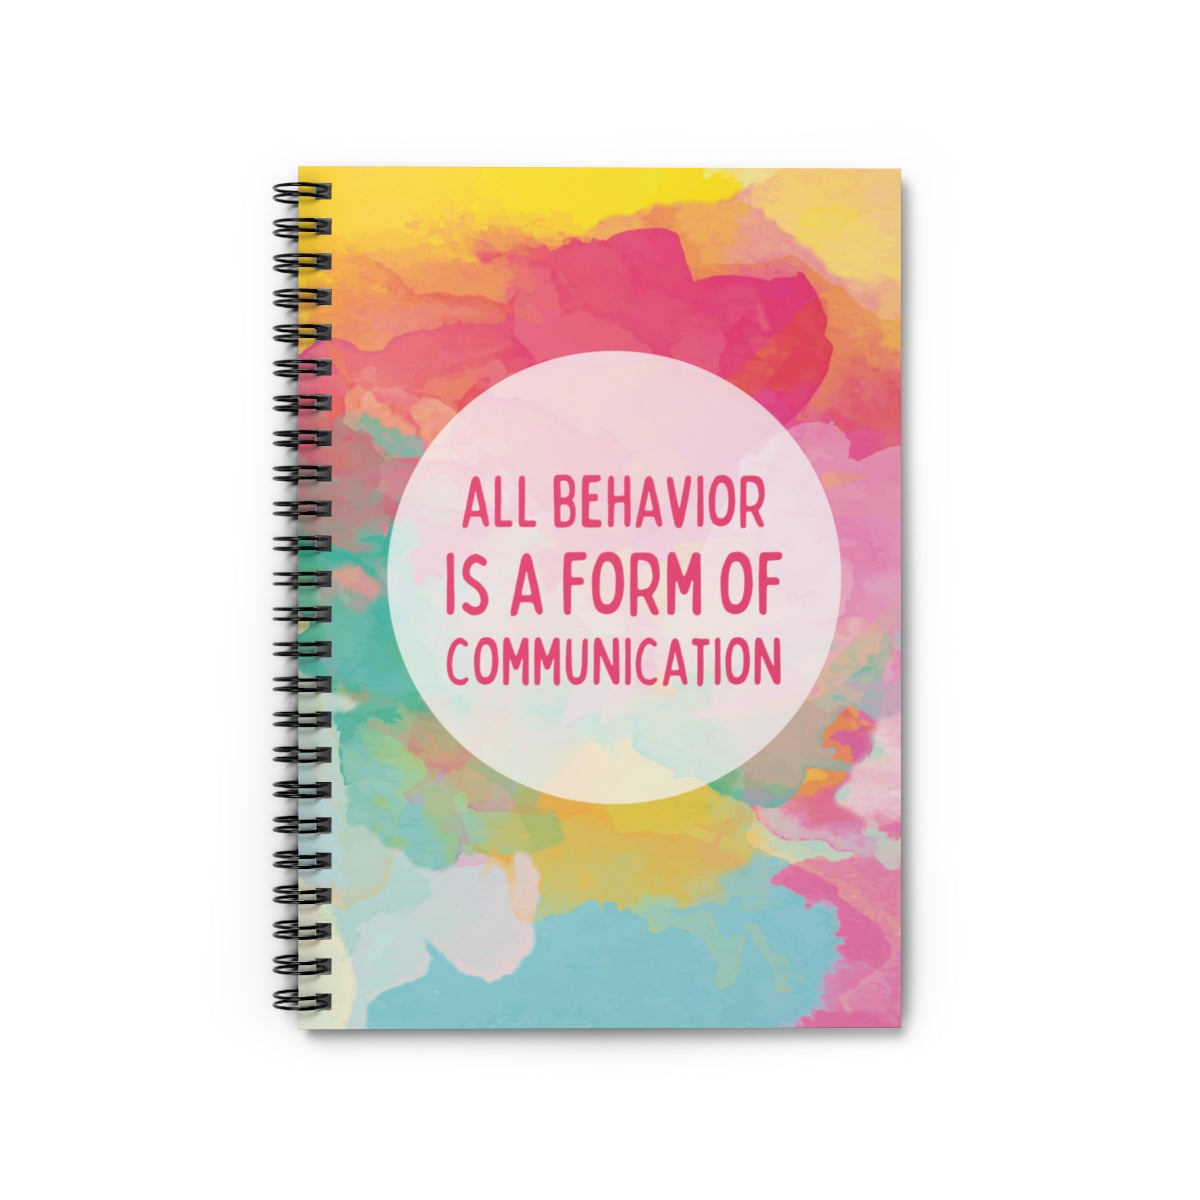 All Behavior is a Form of Communication Notebook - Ruled Line